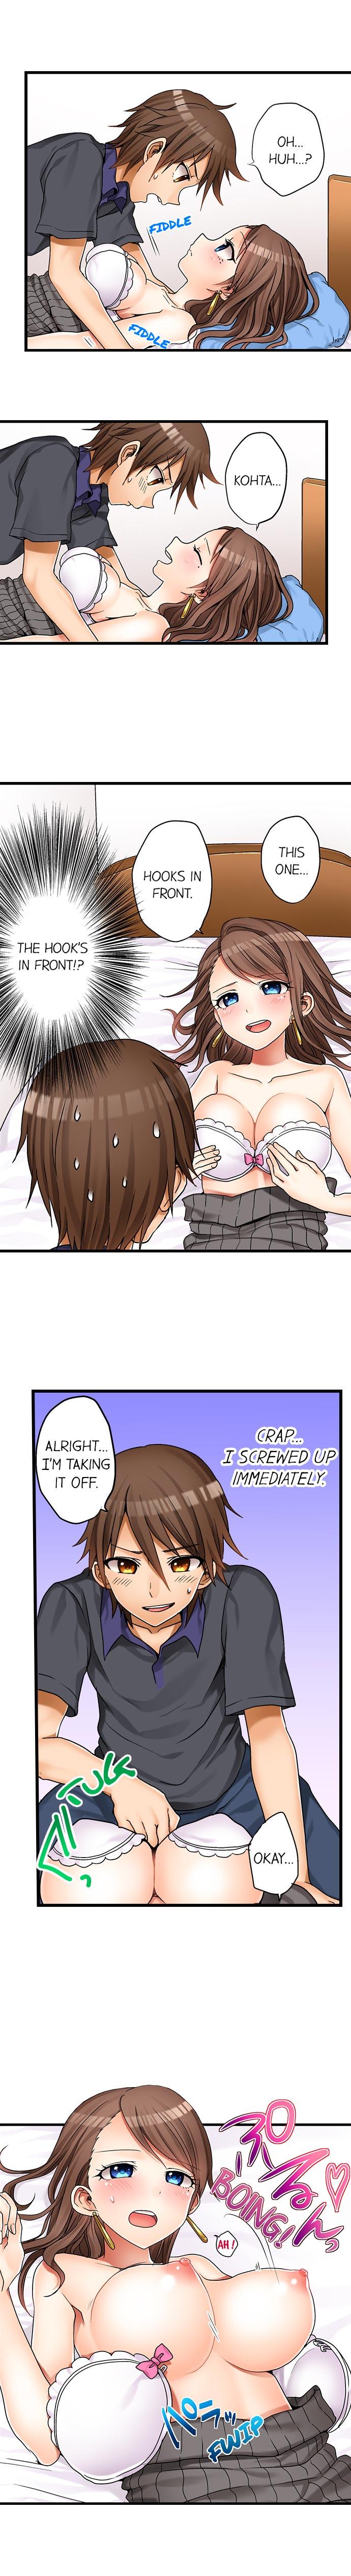 Double Blowjob My First Time is with.... My Little Sister?! - Original Japan - Page 3